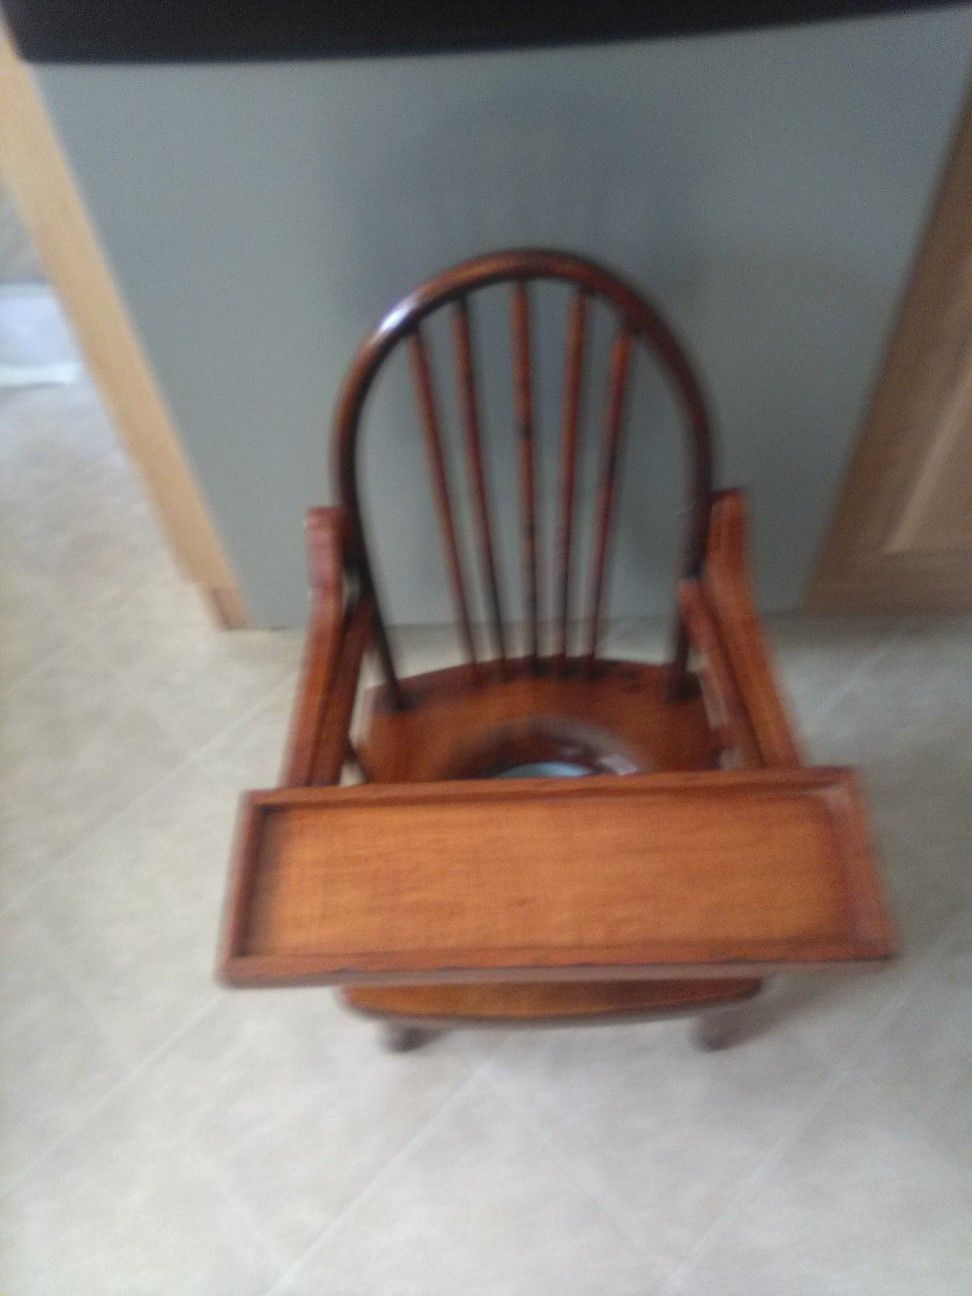 Antique potty chair with catch can